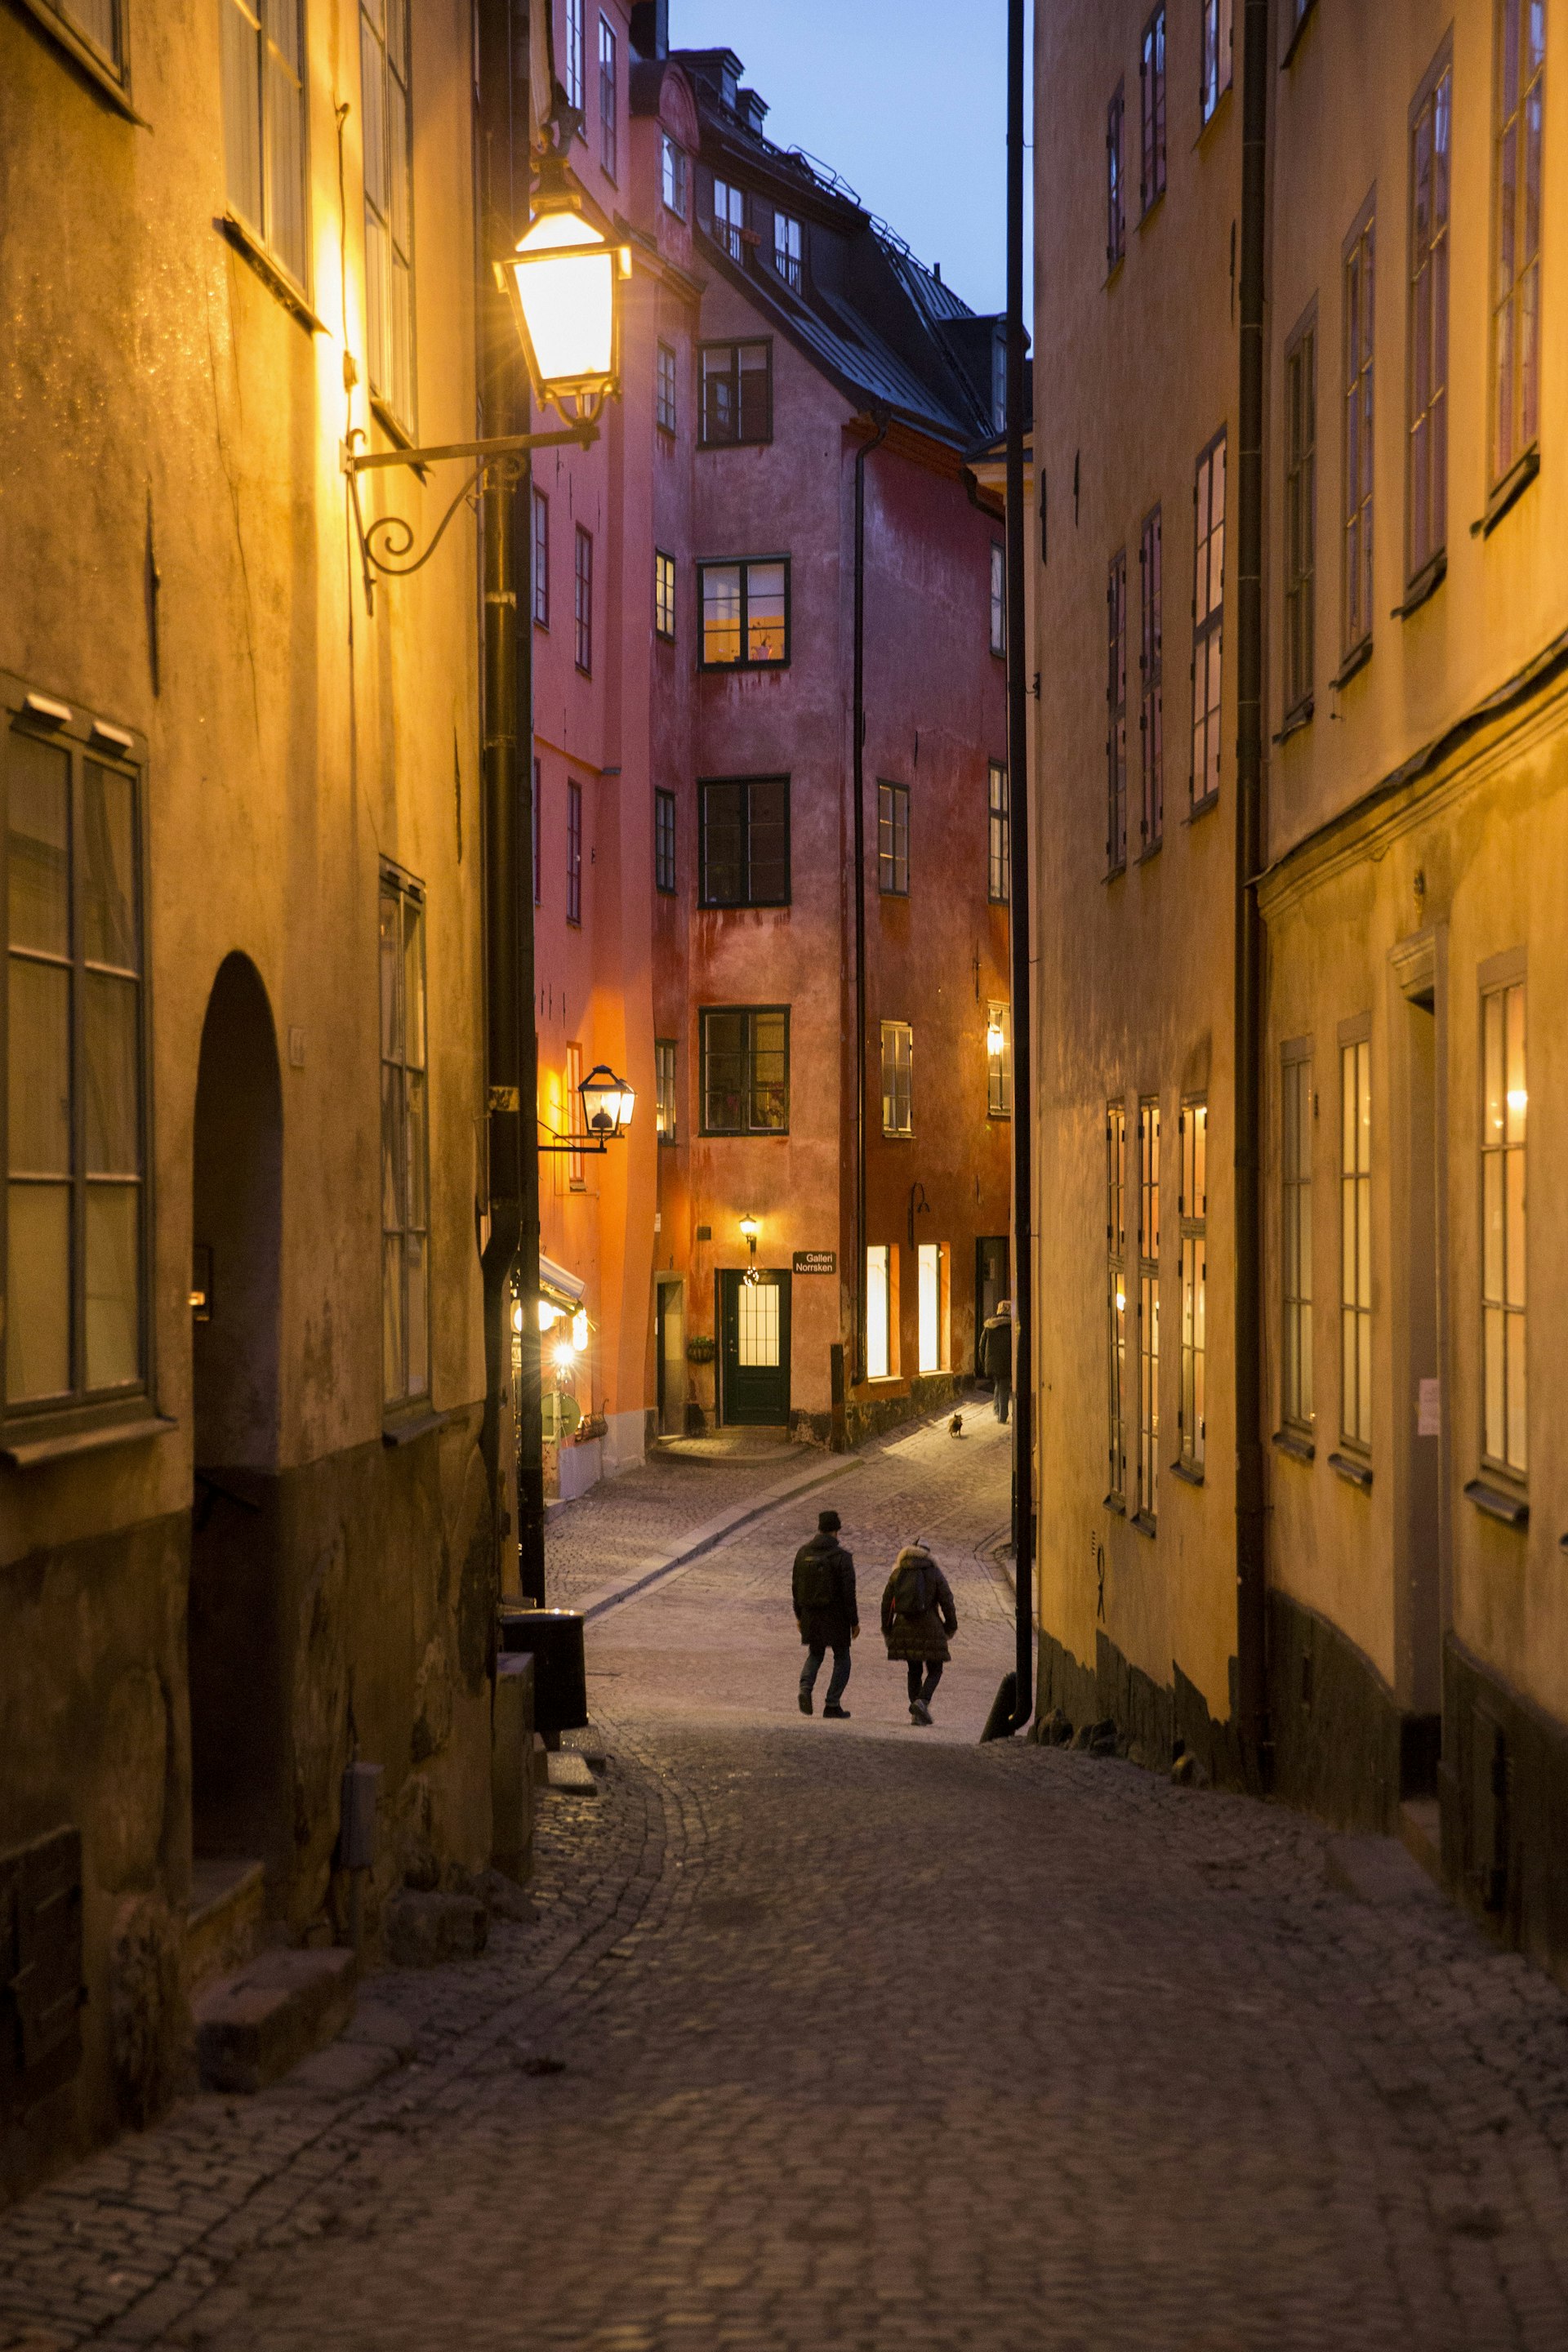 Lamps light up the alleys leading to Kopmantorget (Merchants Square) in Gamla Stan at dusk.